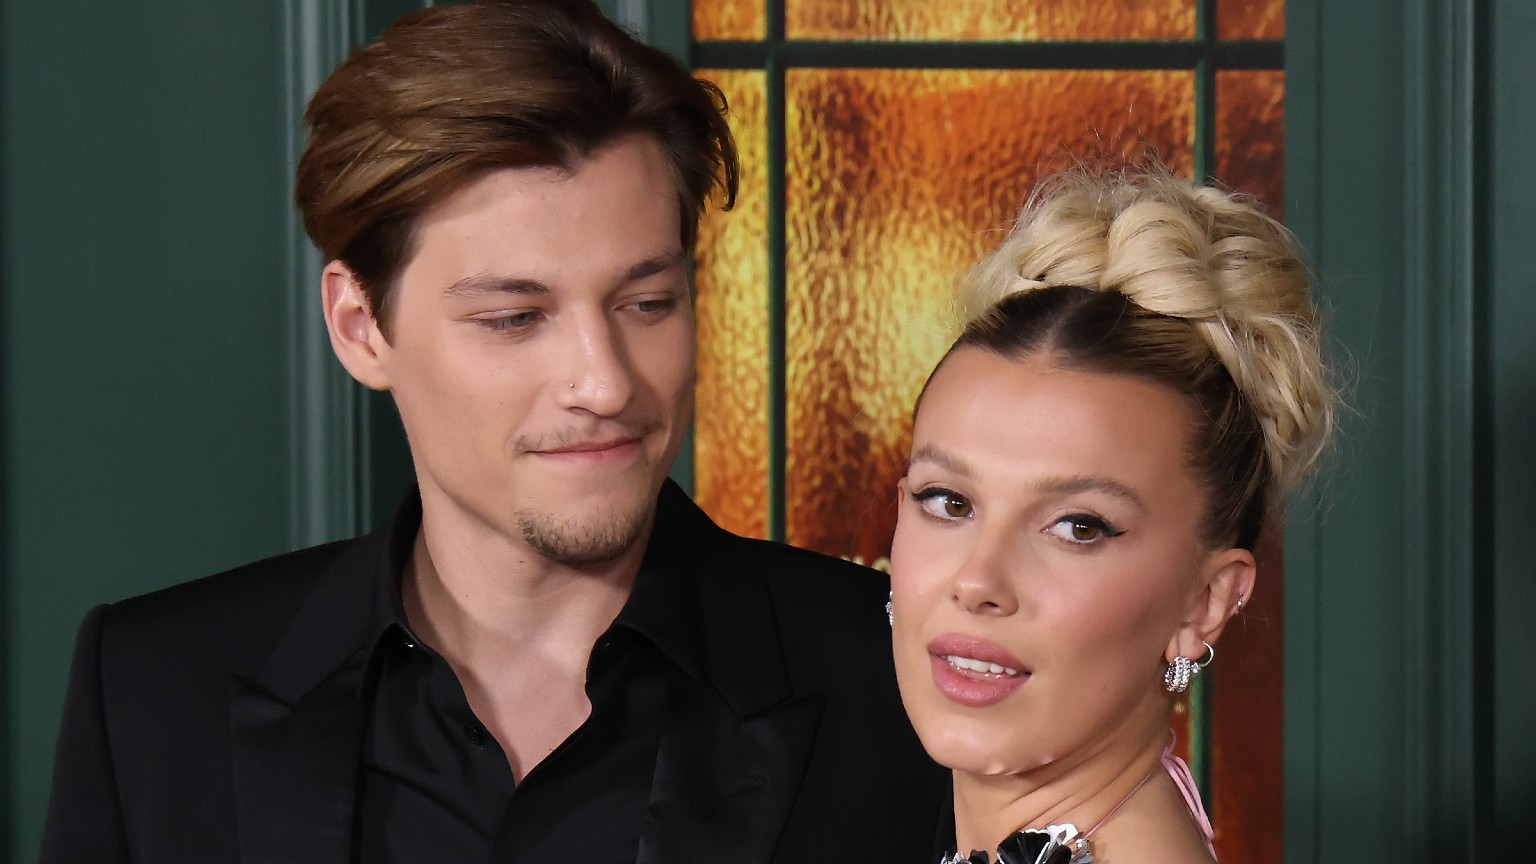 Fans Have Mixed Reactions To ‘Stranger Things’ Millie Bobby Brown Engagement